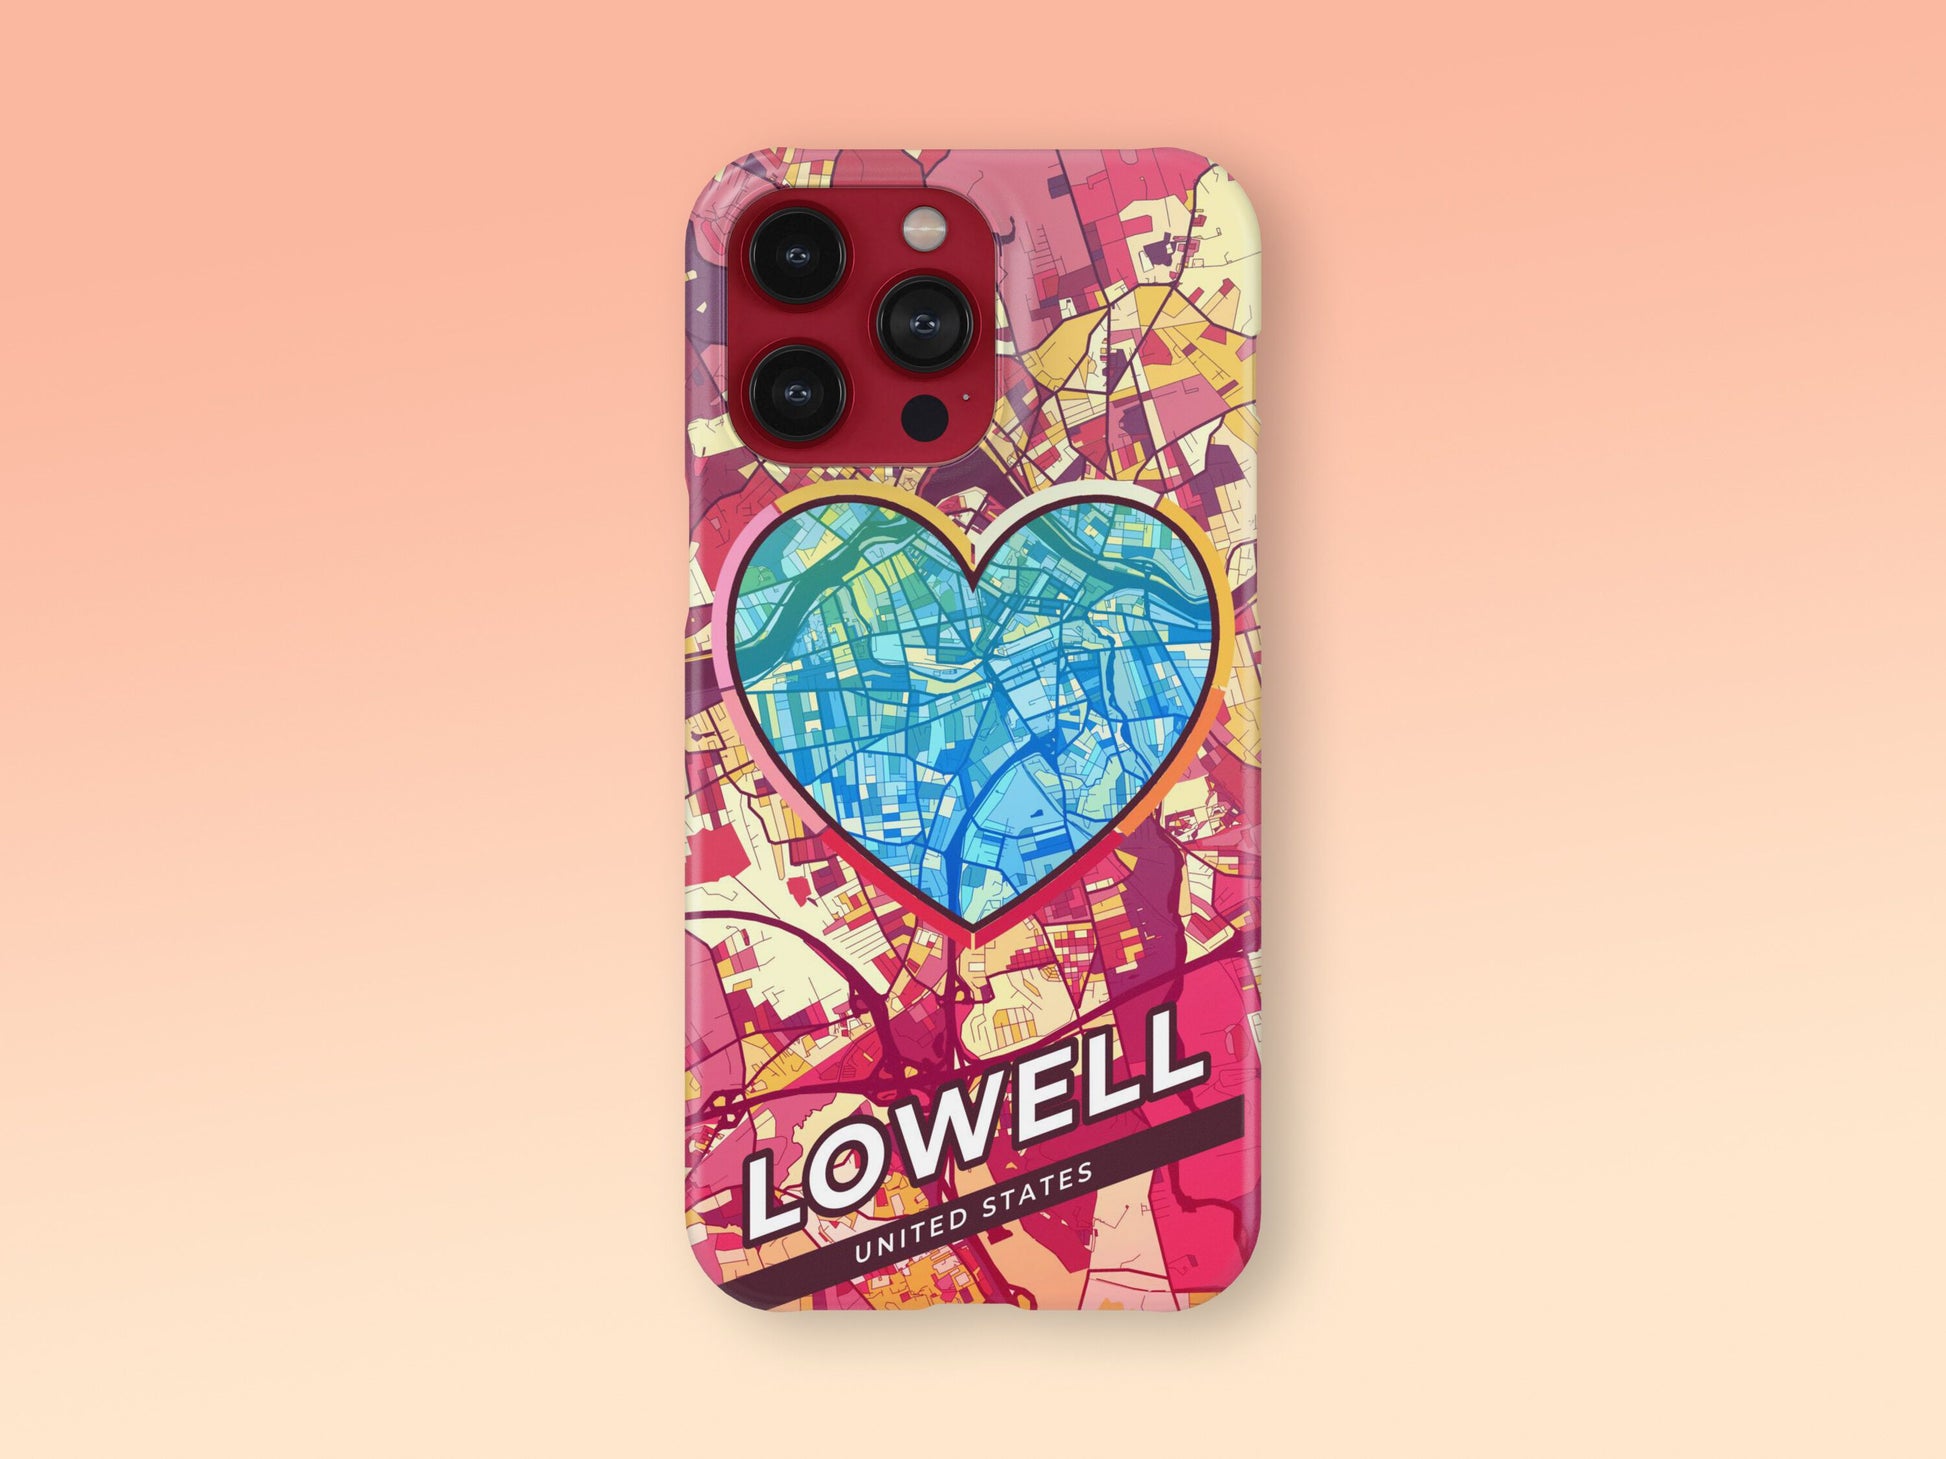 Lowell Massachusetts slim phone case with colorful icon. Birthday, wedding or housewarming gift. Couple match cases. 2